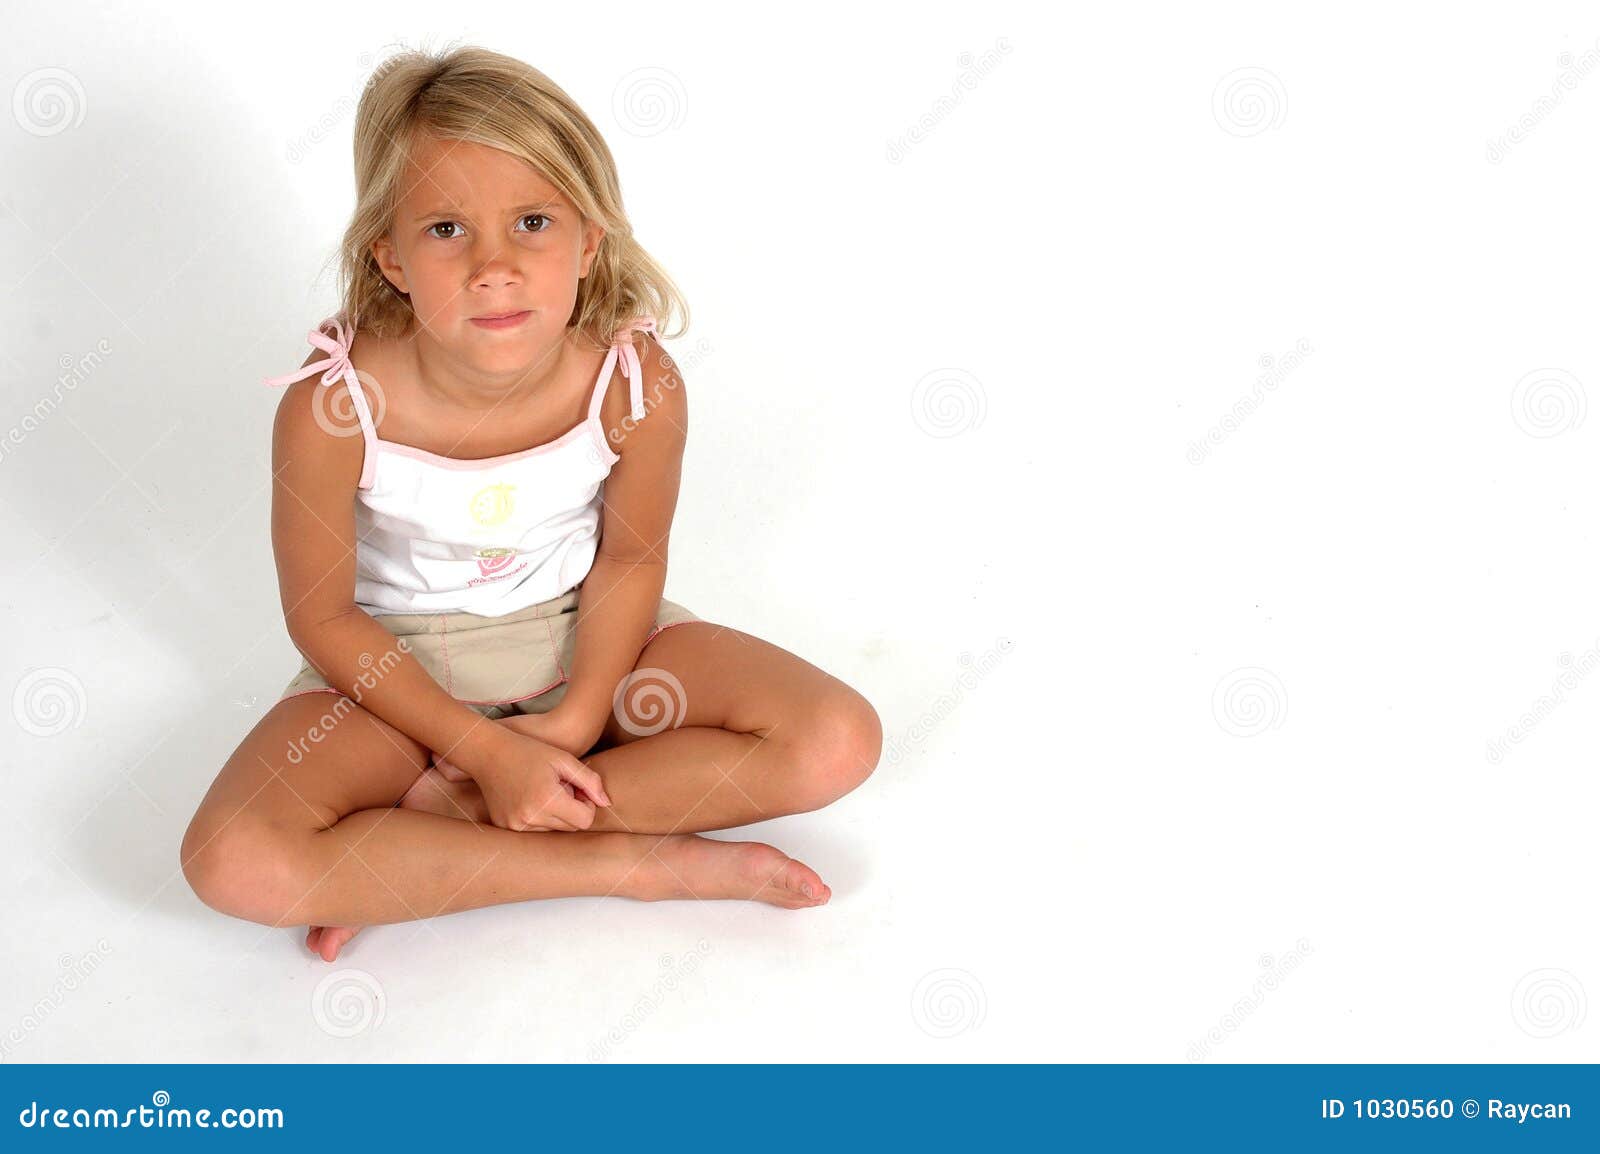 Upset Child stock photo. Image of dread, supervision ...
